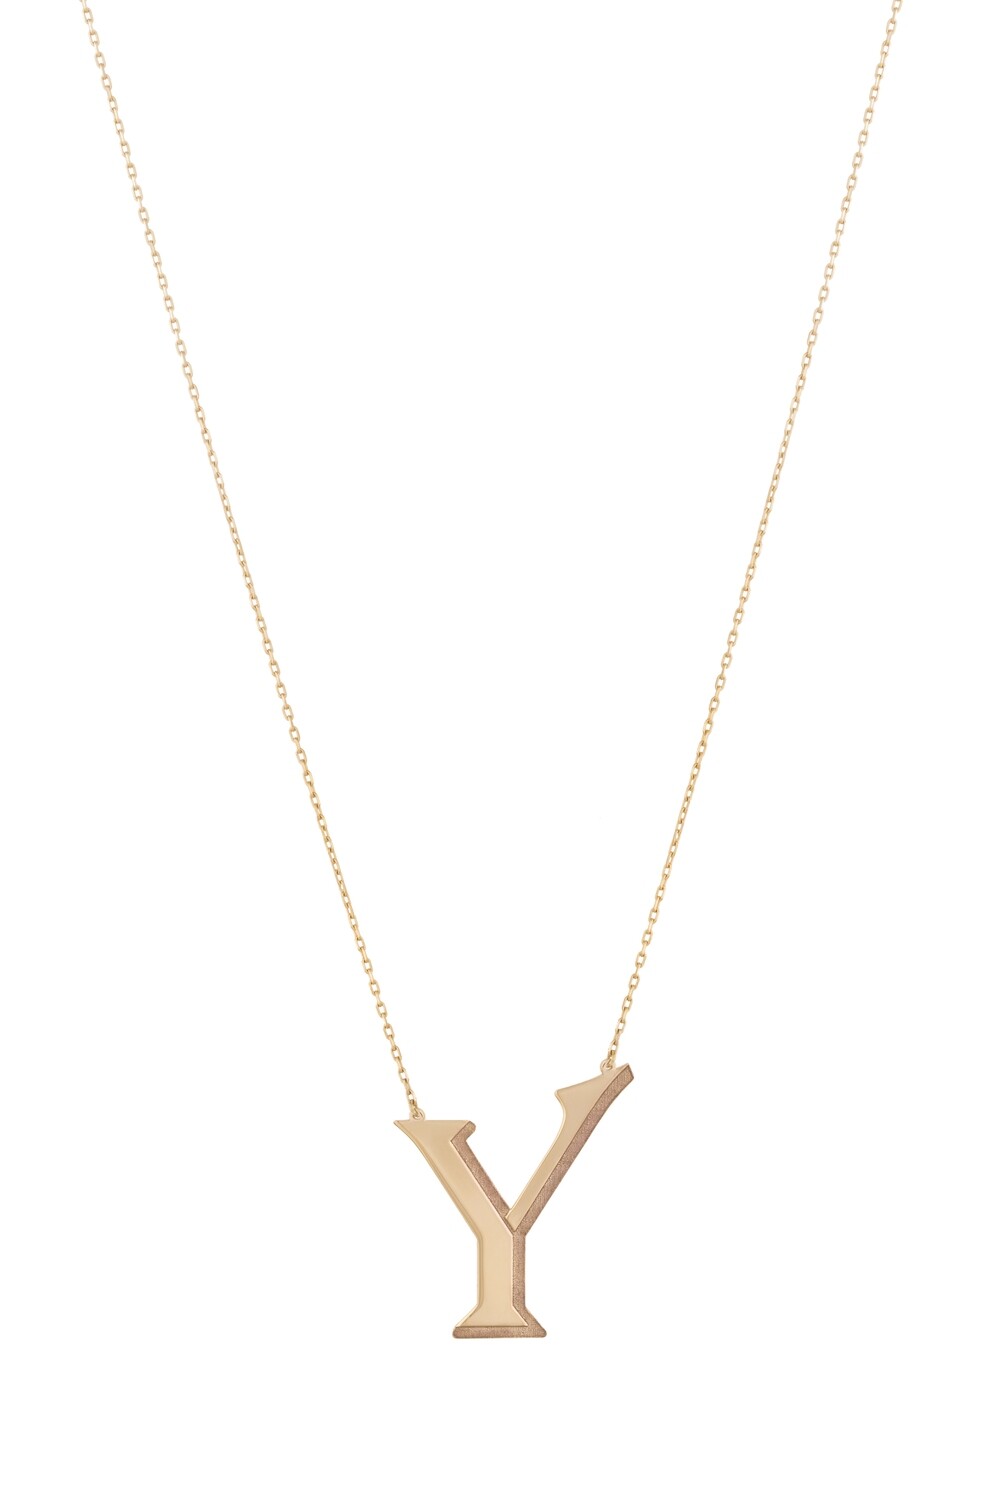 Initials Gold Necklace Letter Y